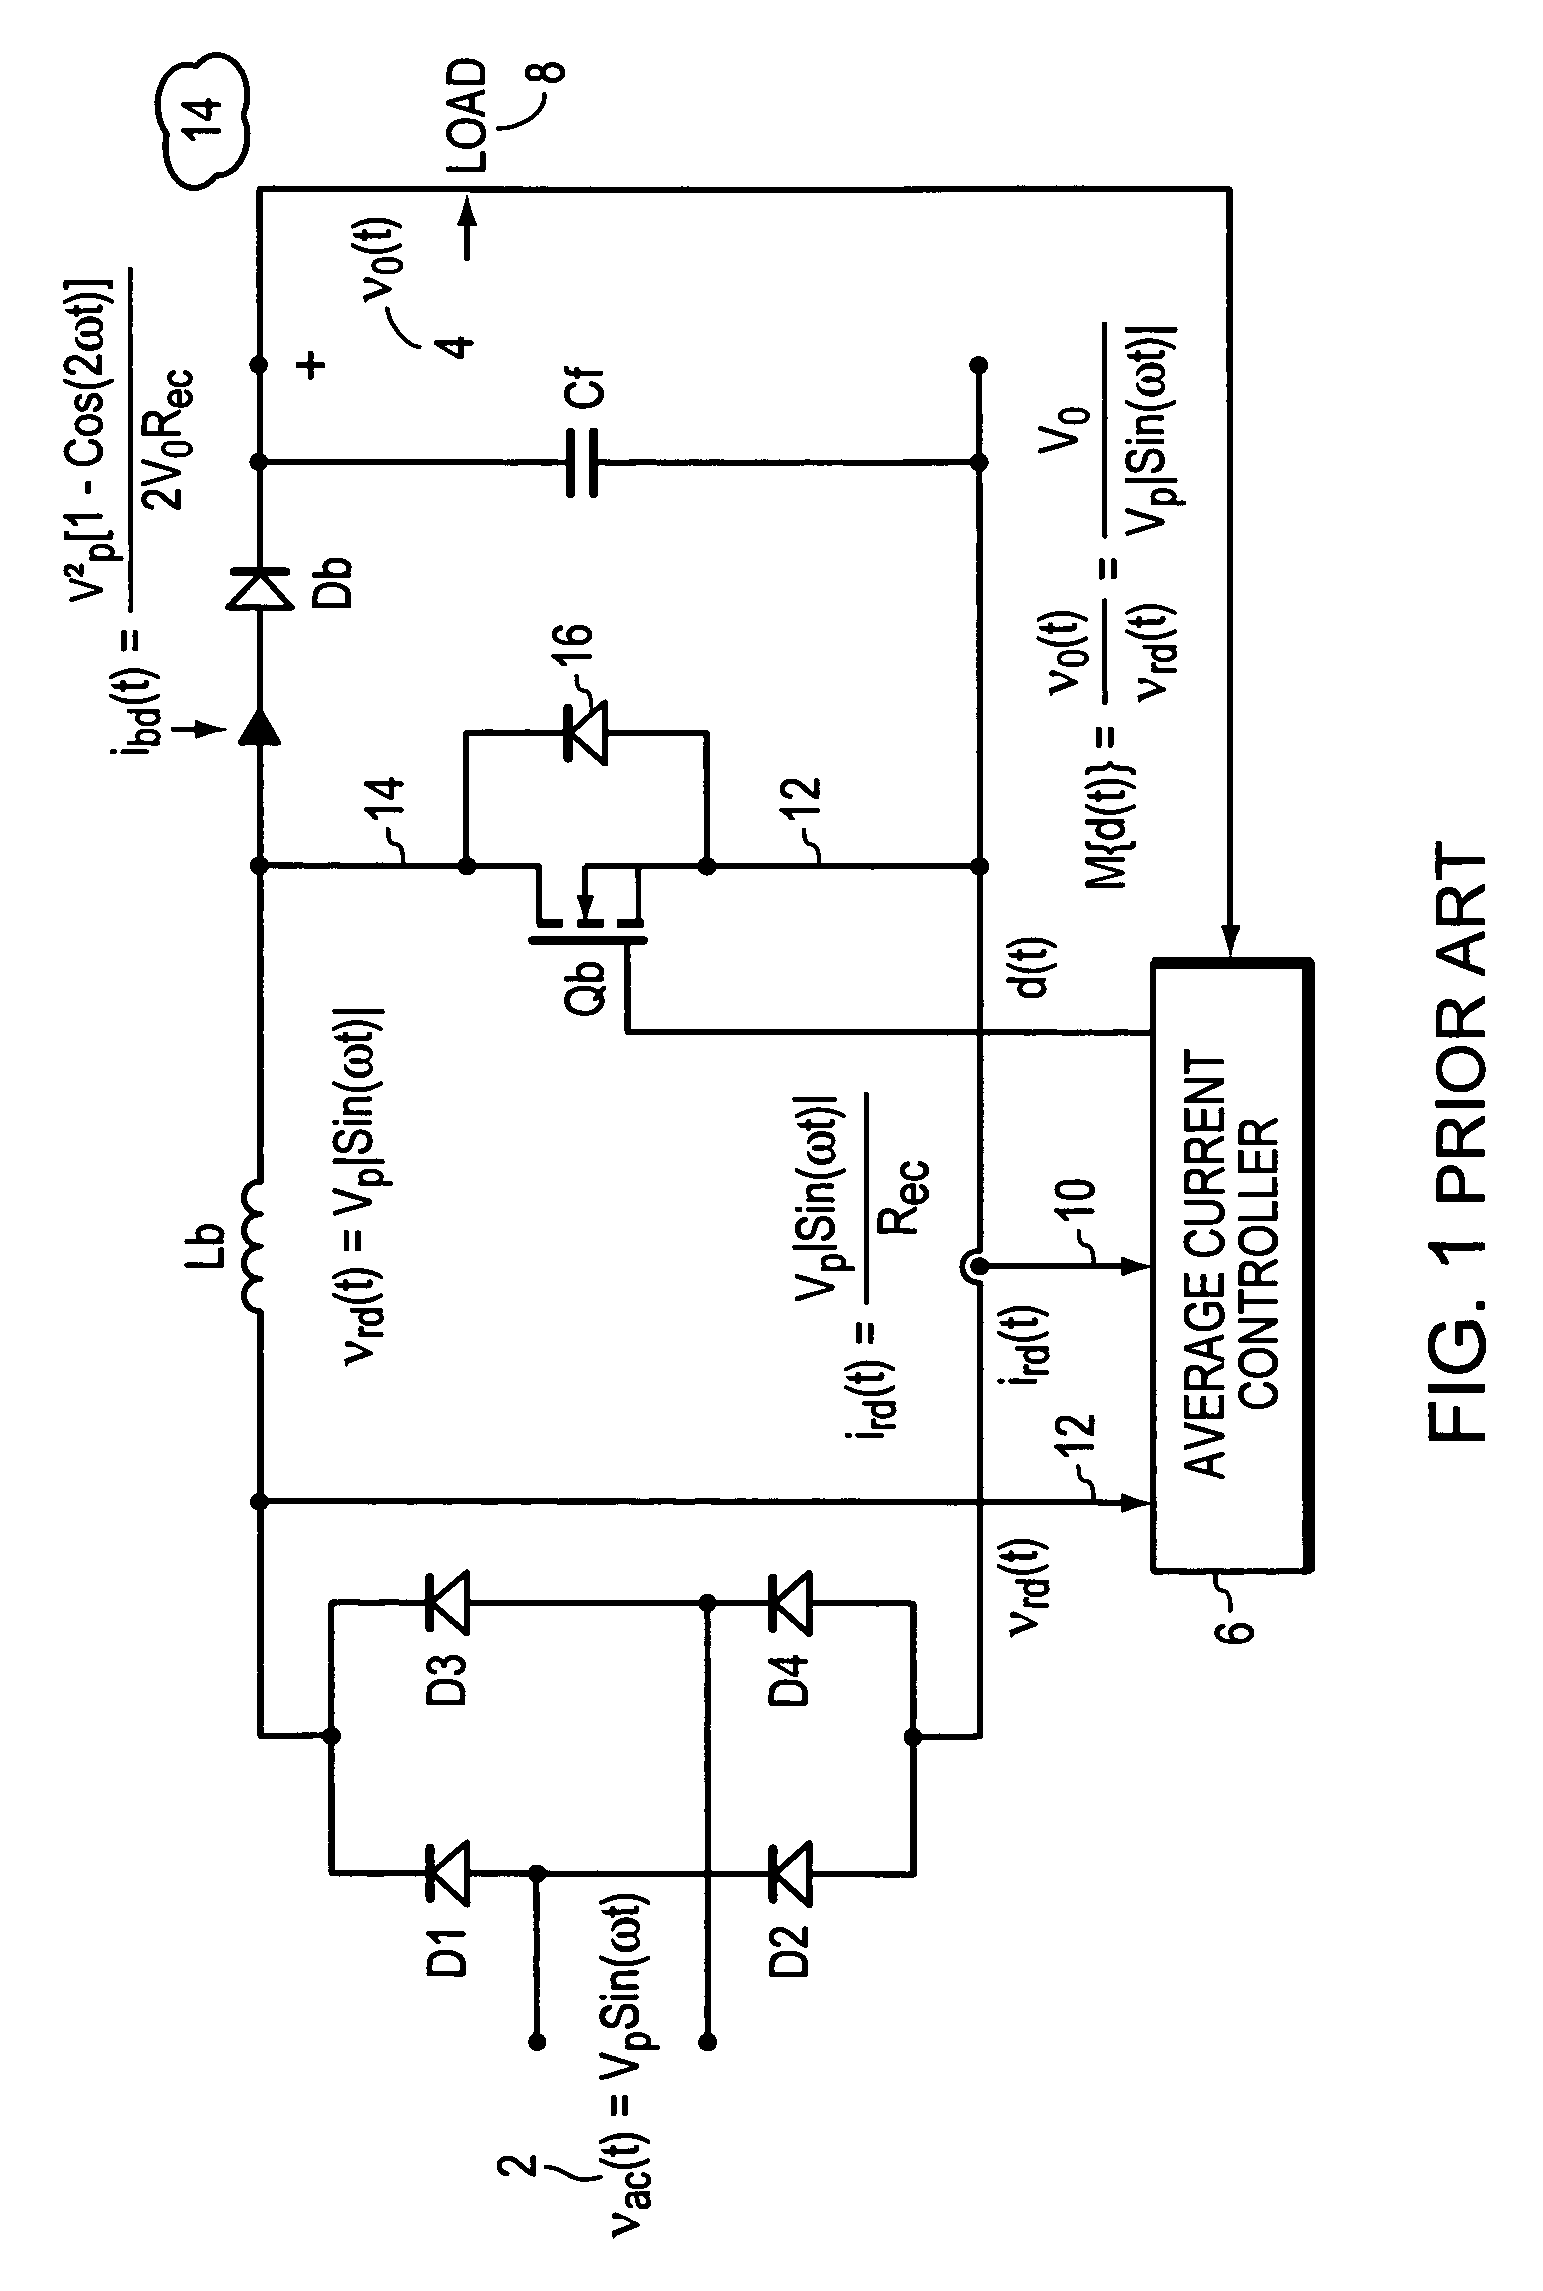 Vrms and rectified current sense full-bridge synchronous-rectification integrated with PFC